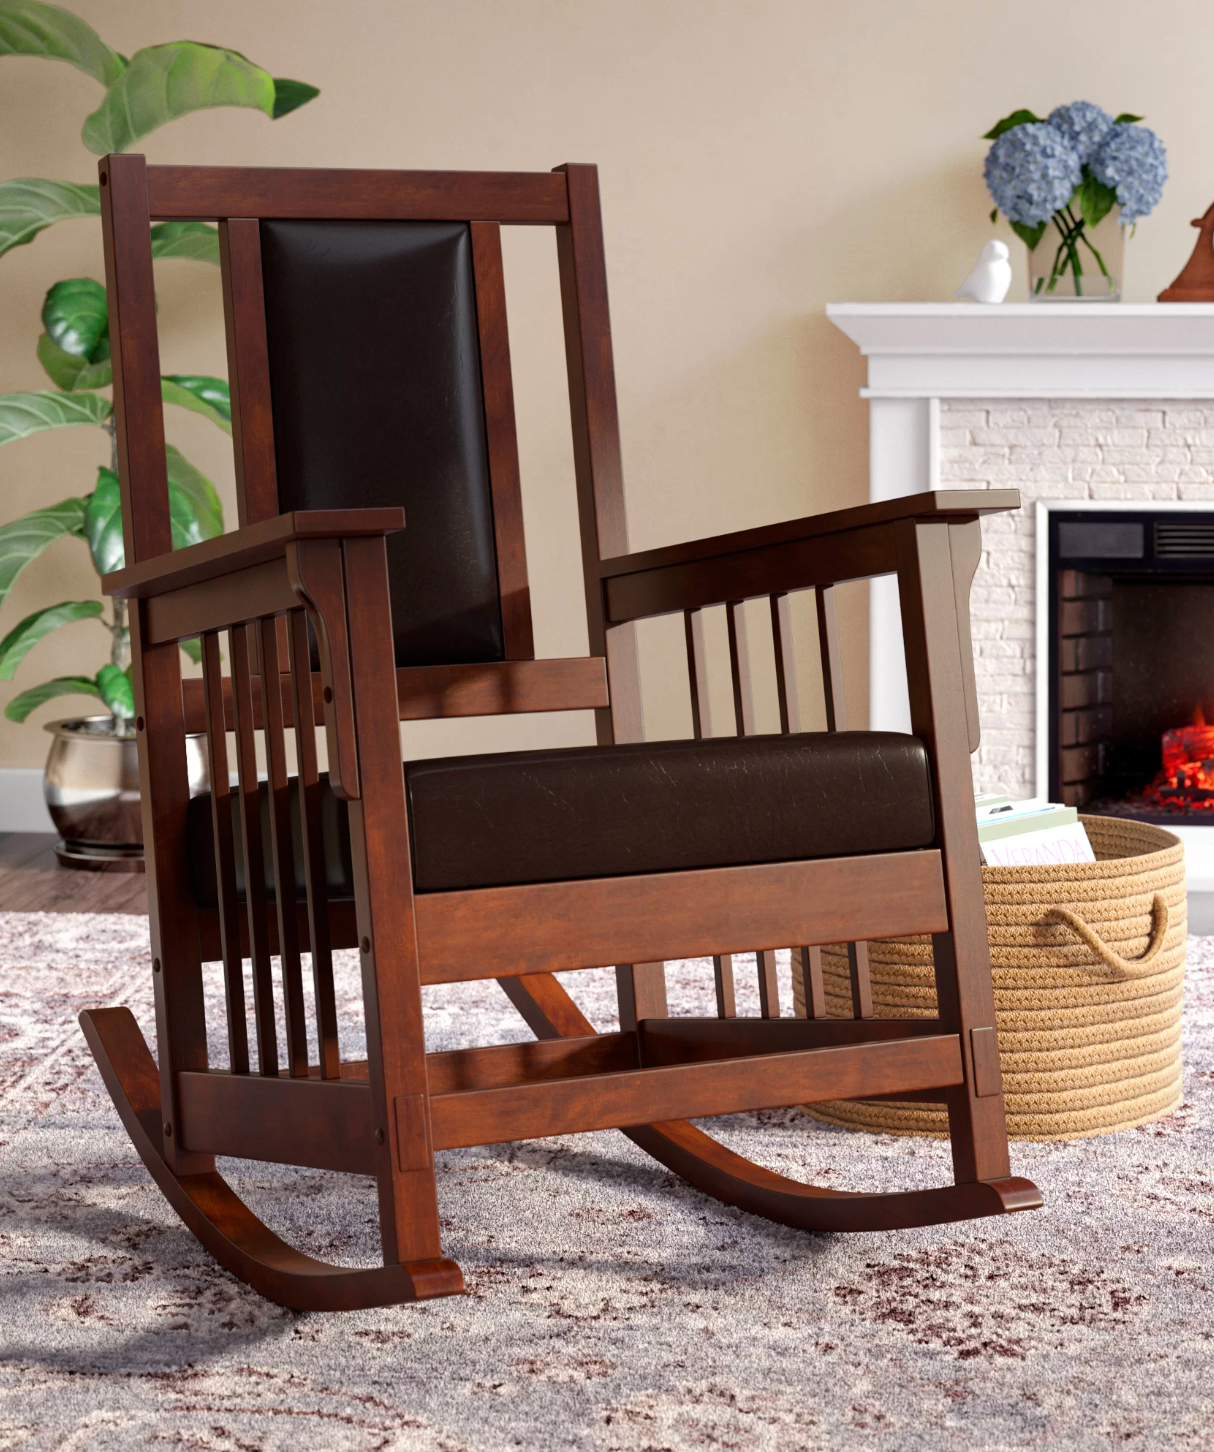 Dark brown wooden rocking chair with slated side and padded backing and seat in brown